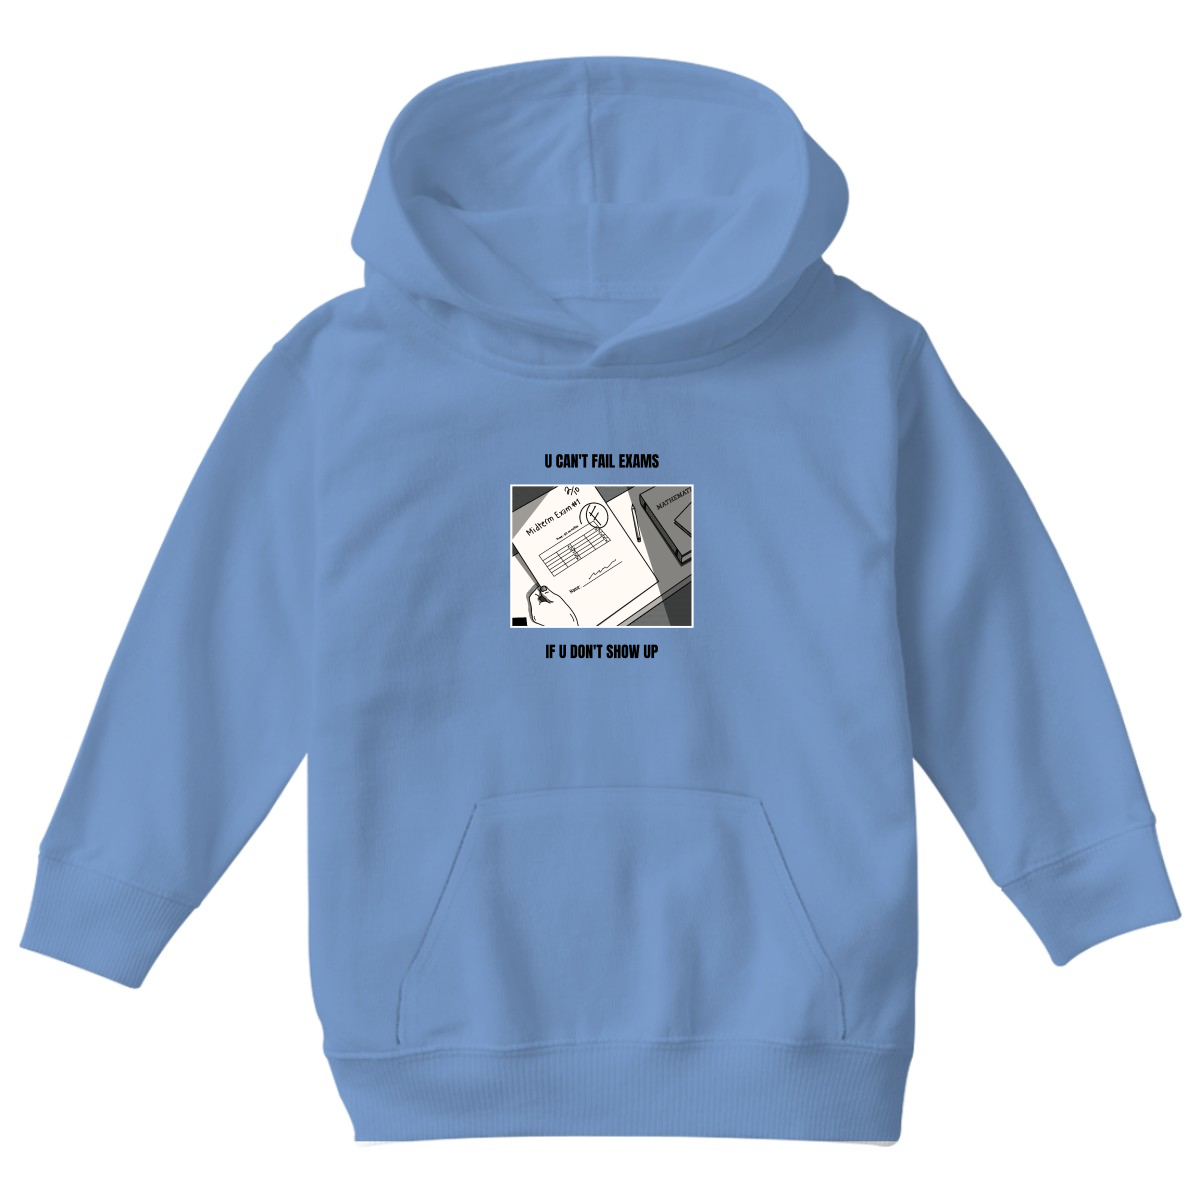 U Can't Fail Exams If U Don't Show Up Kids Hoodie | Blue